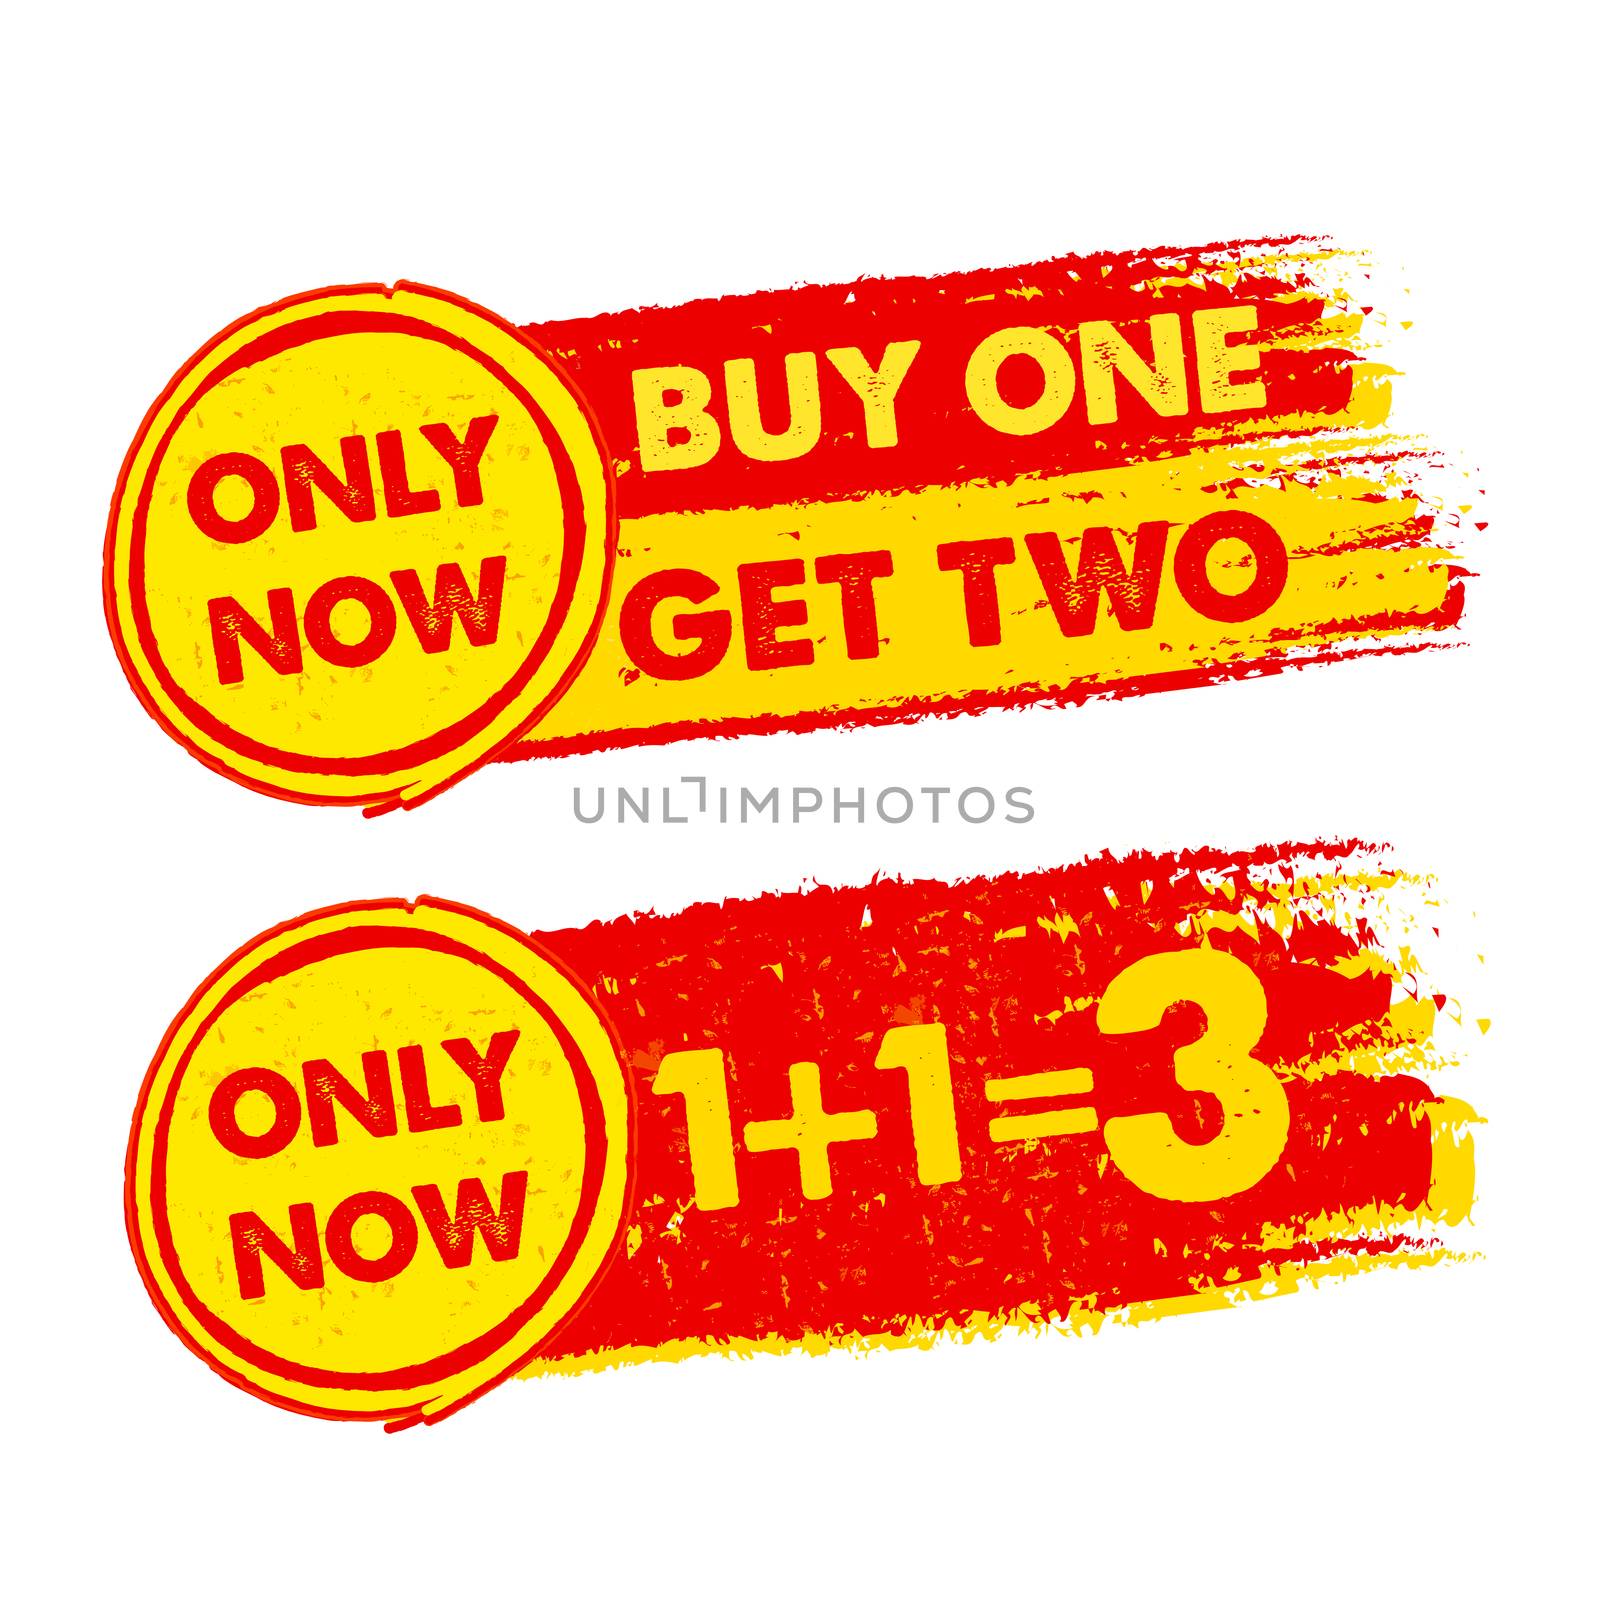 only now, buy one get two, 1 plus 1 is 3, drawn labels by marinini